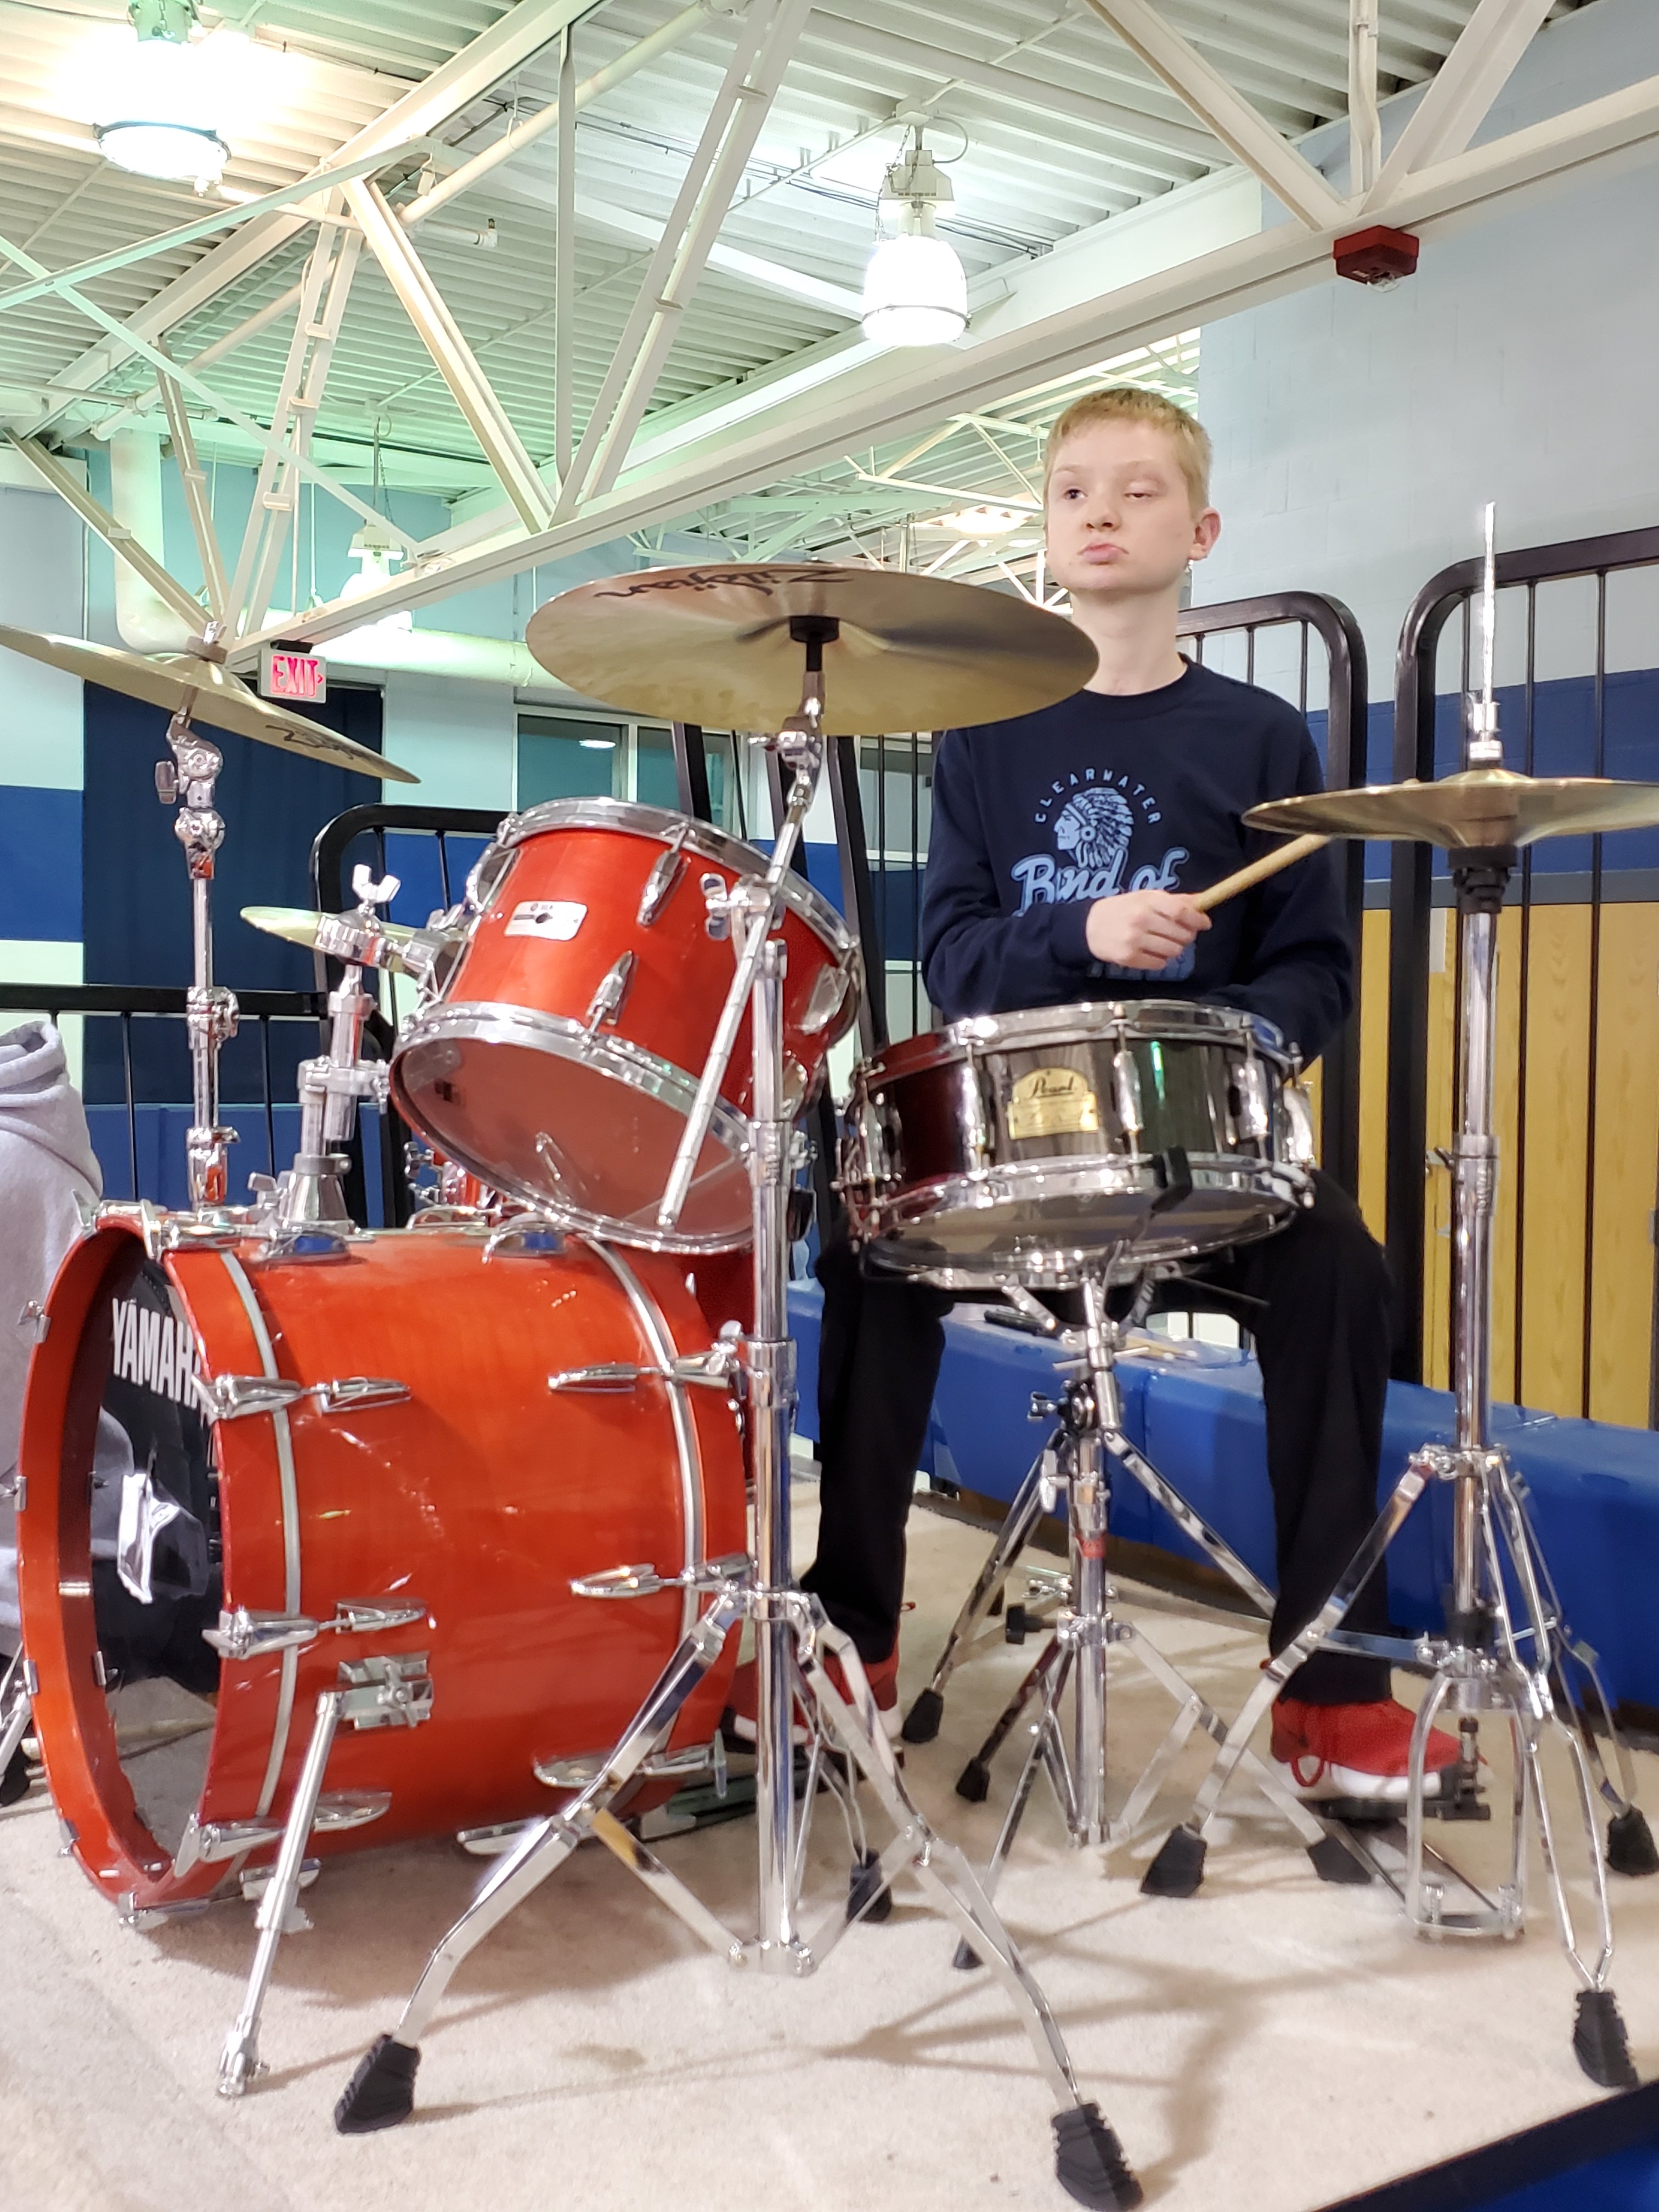 Rockin' the drum set in pep band!